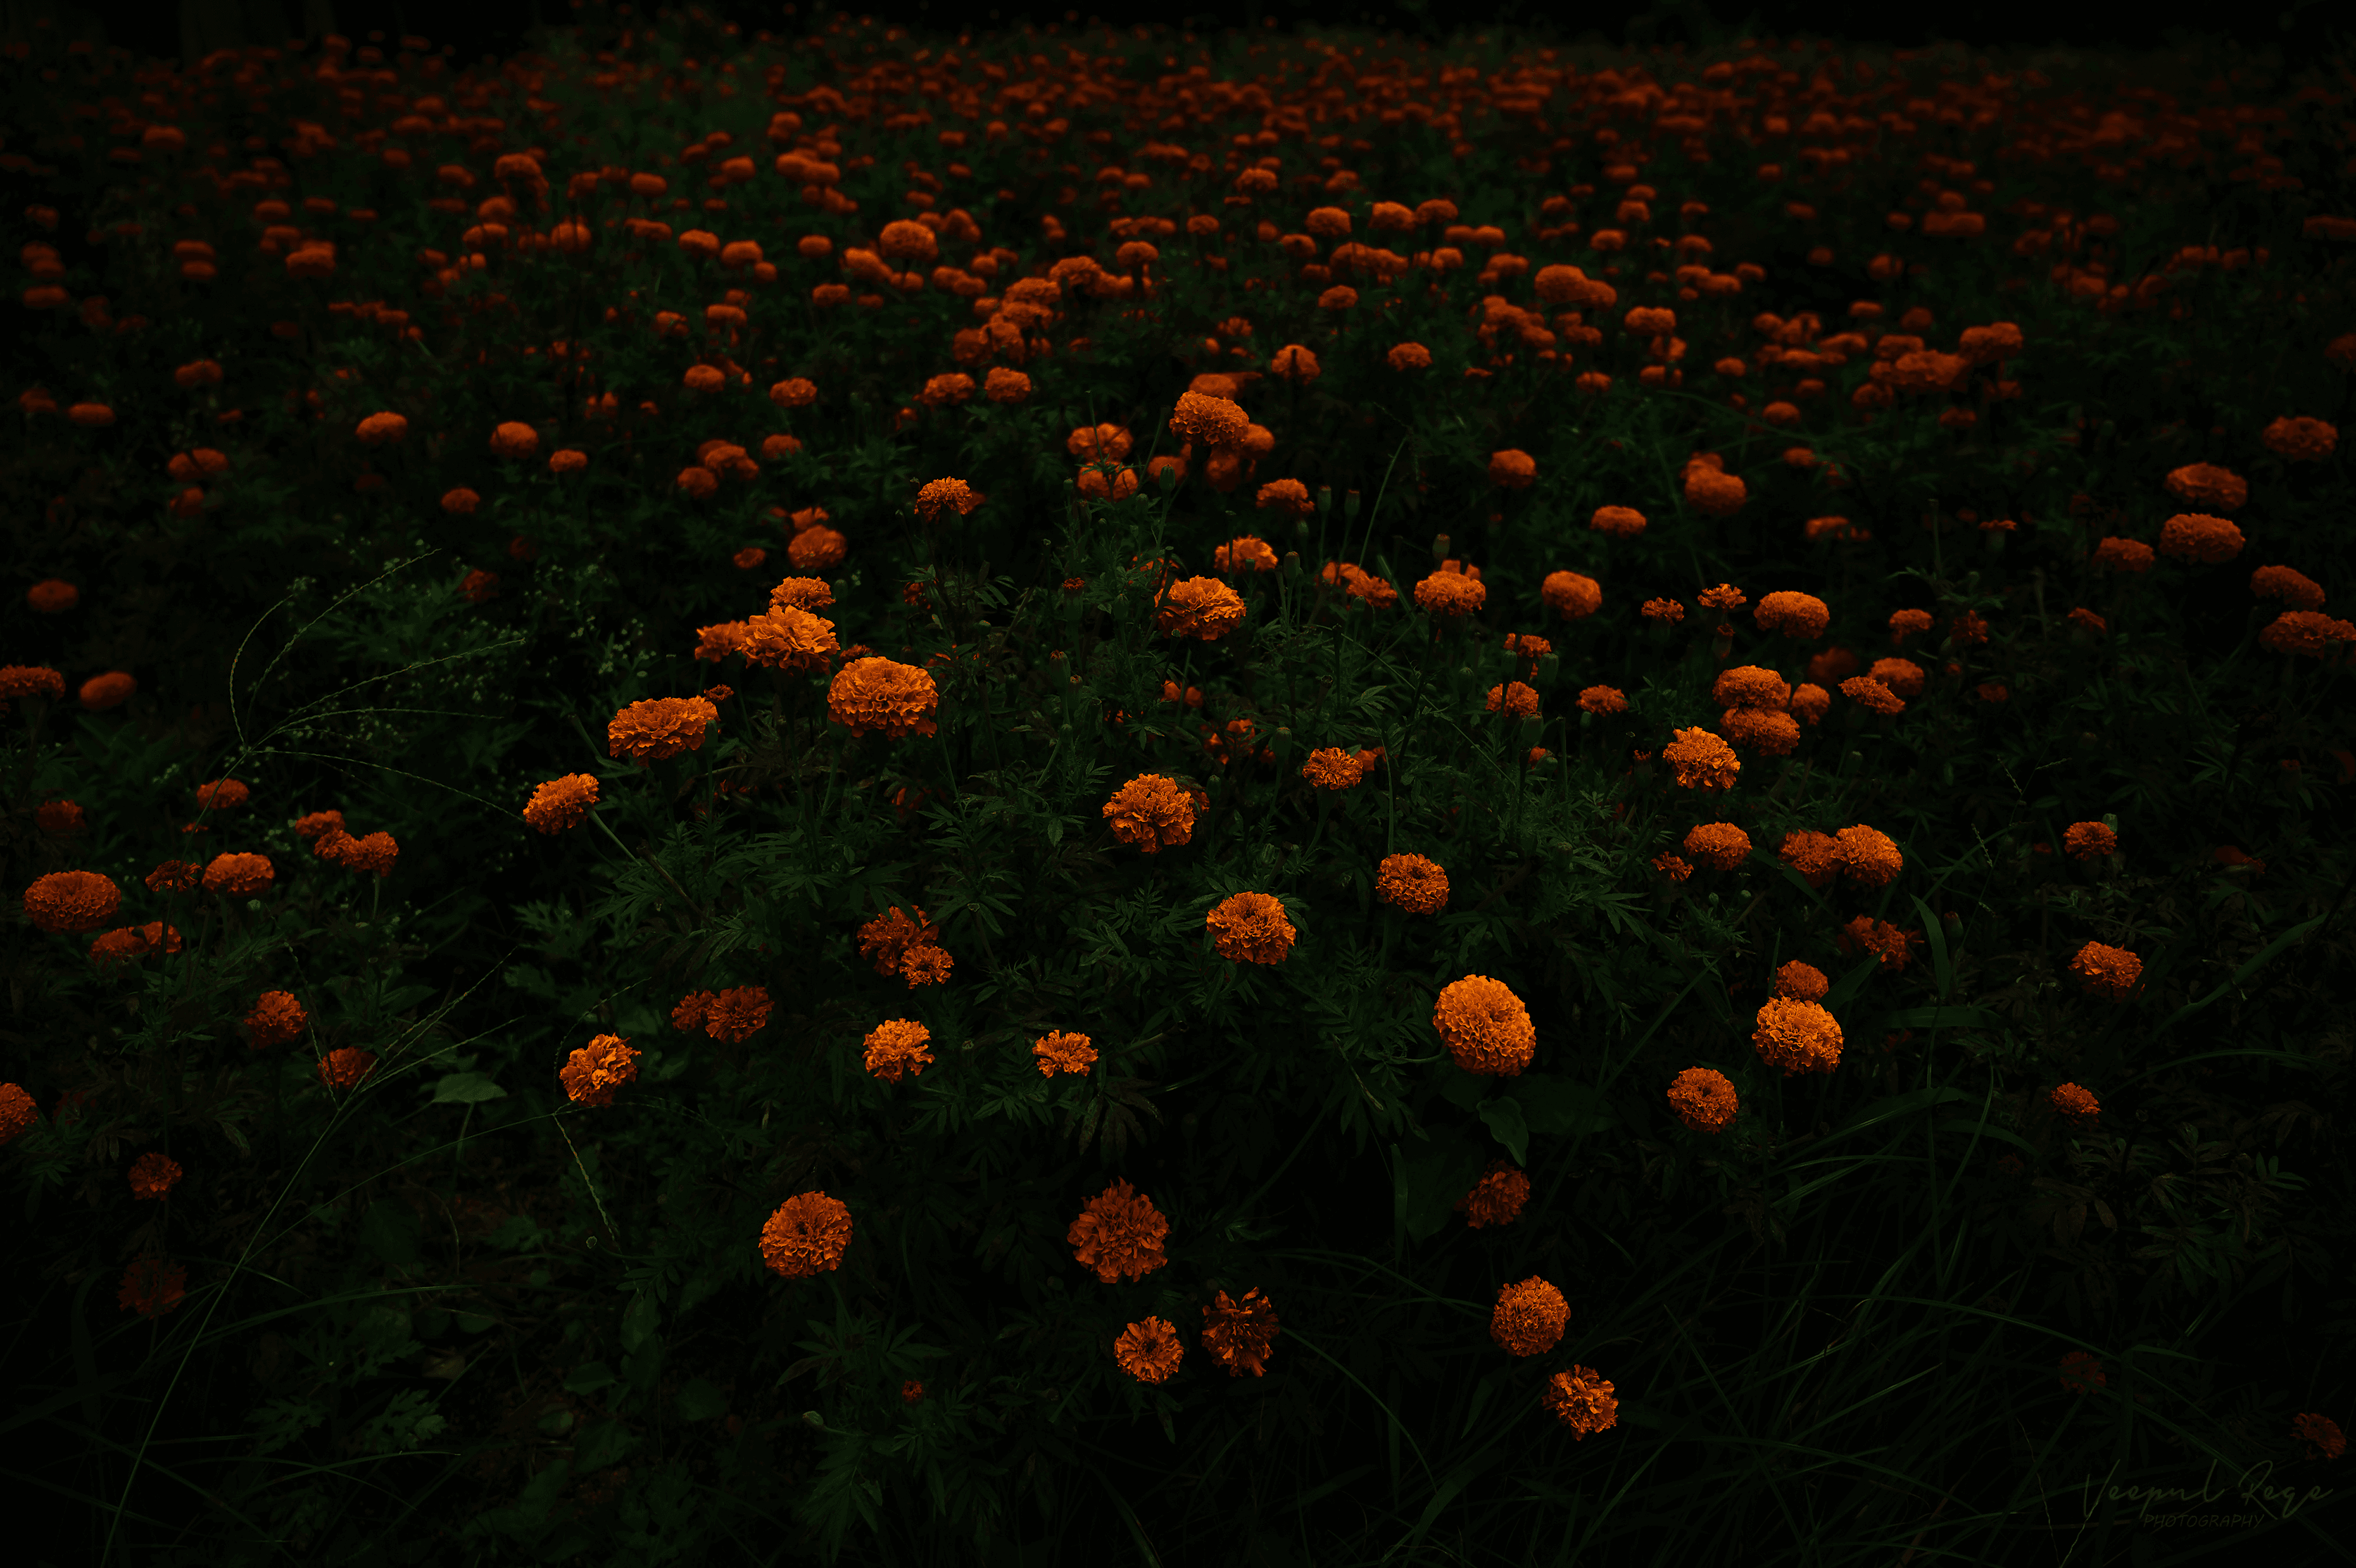 Bed of flowers